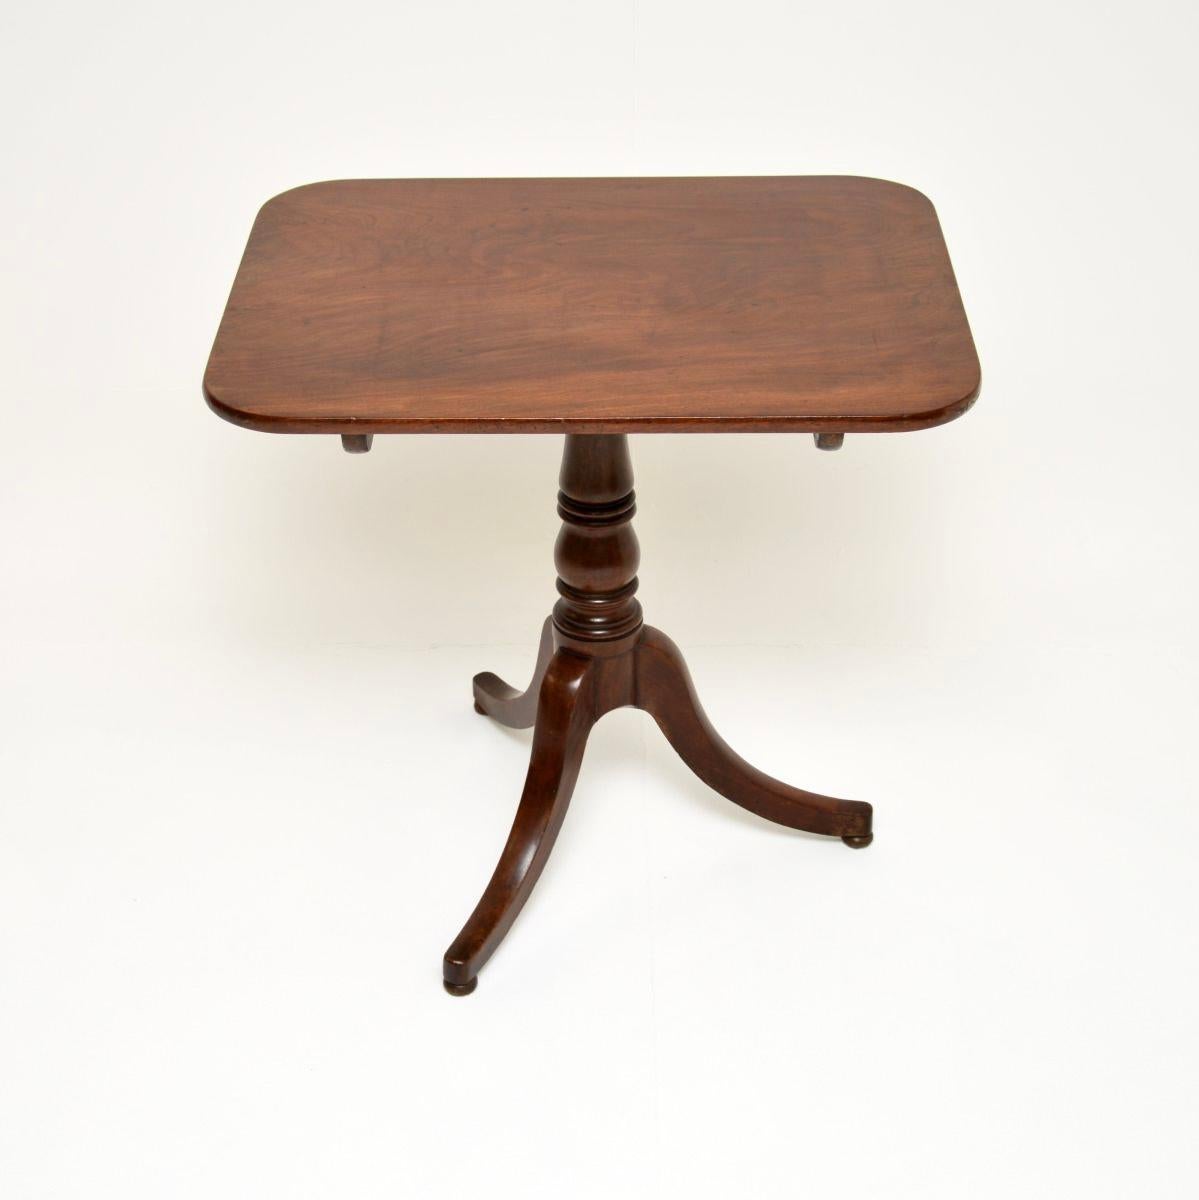 A smart and very well made antique Georgian tilt top occasional table. This was made in England, it dates from around the 1800-1820 period.

It is of excellent quality, it’s thick and beautifully constructed. The rectangular top can tilt upwards to